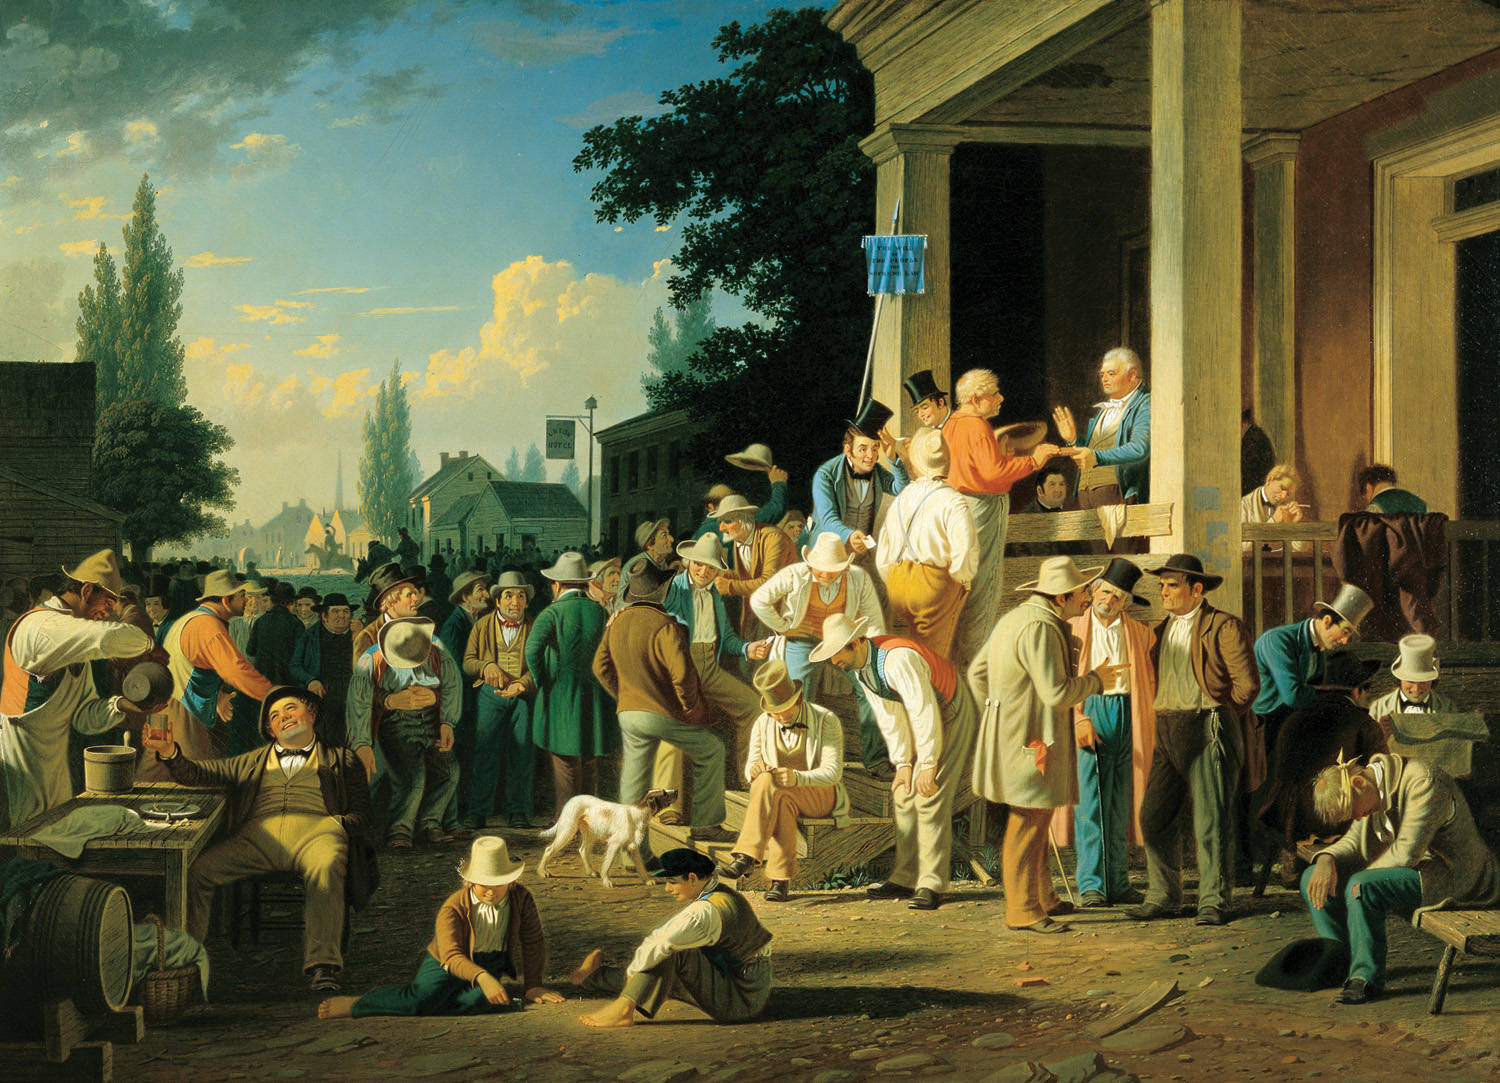 George Caleb Bingham, "County Election" (1852) --Courtesy of St. Louis Museum of Art